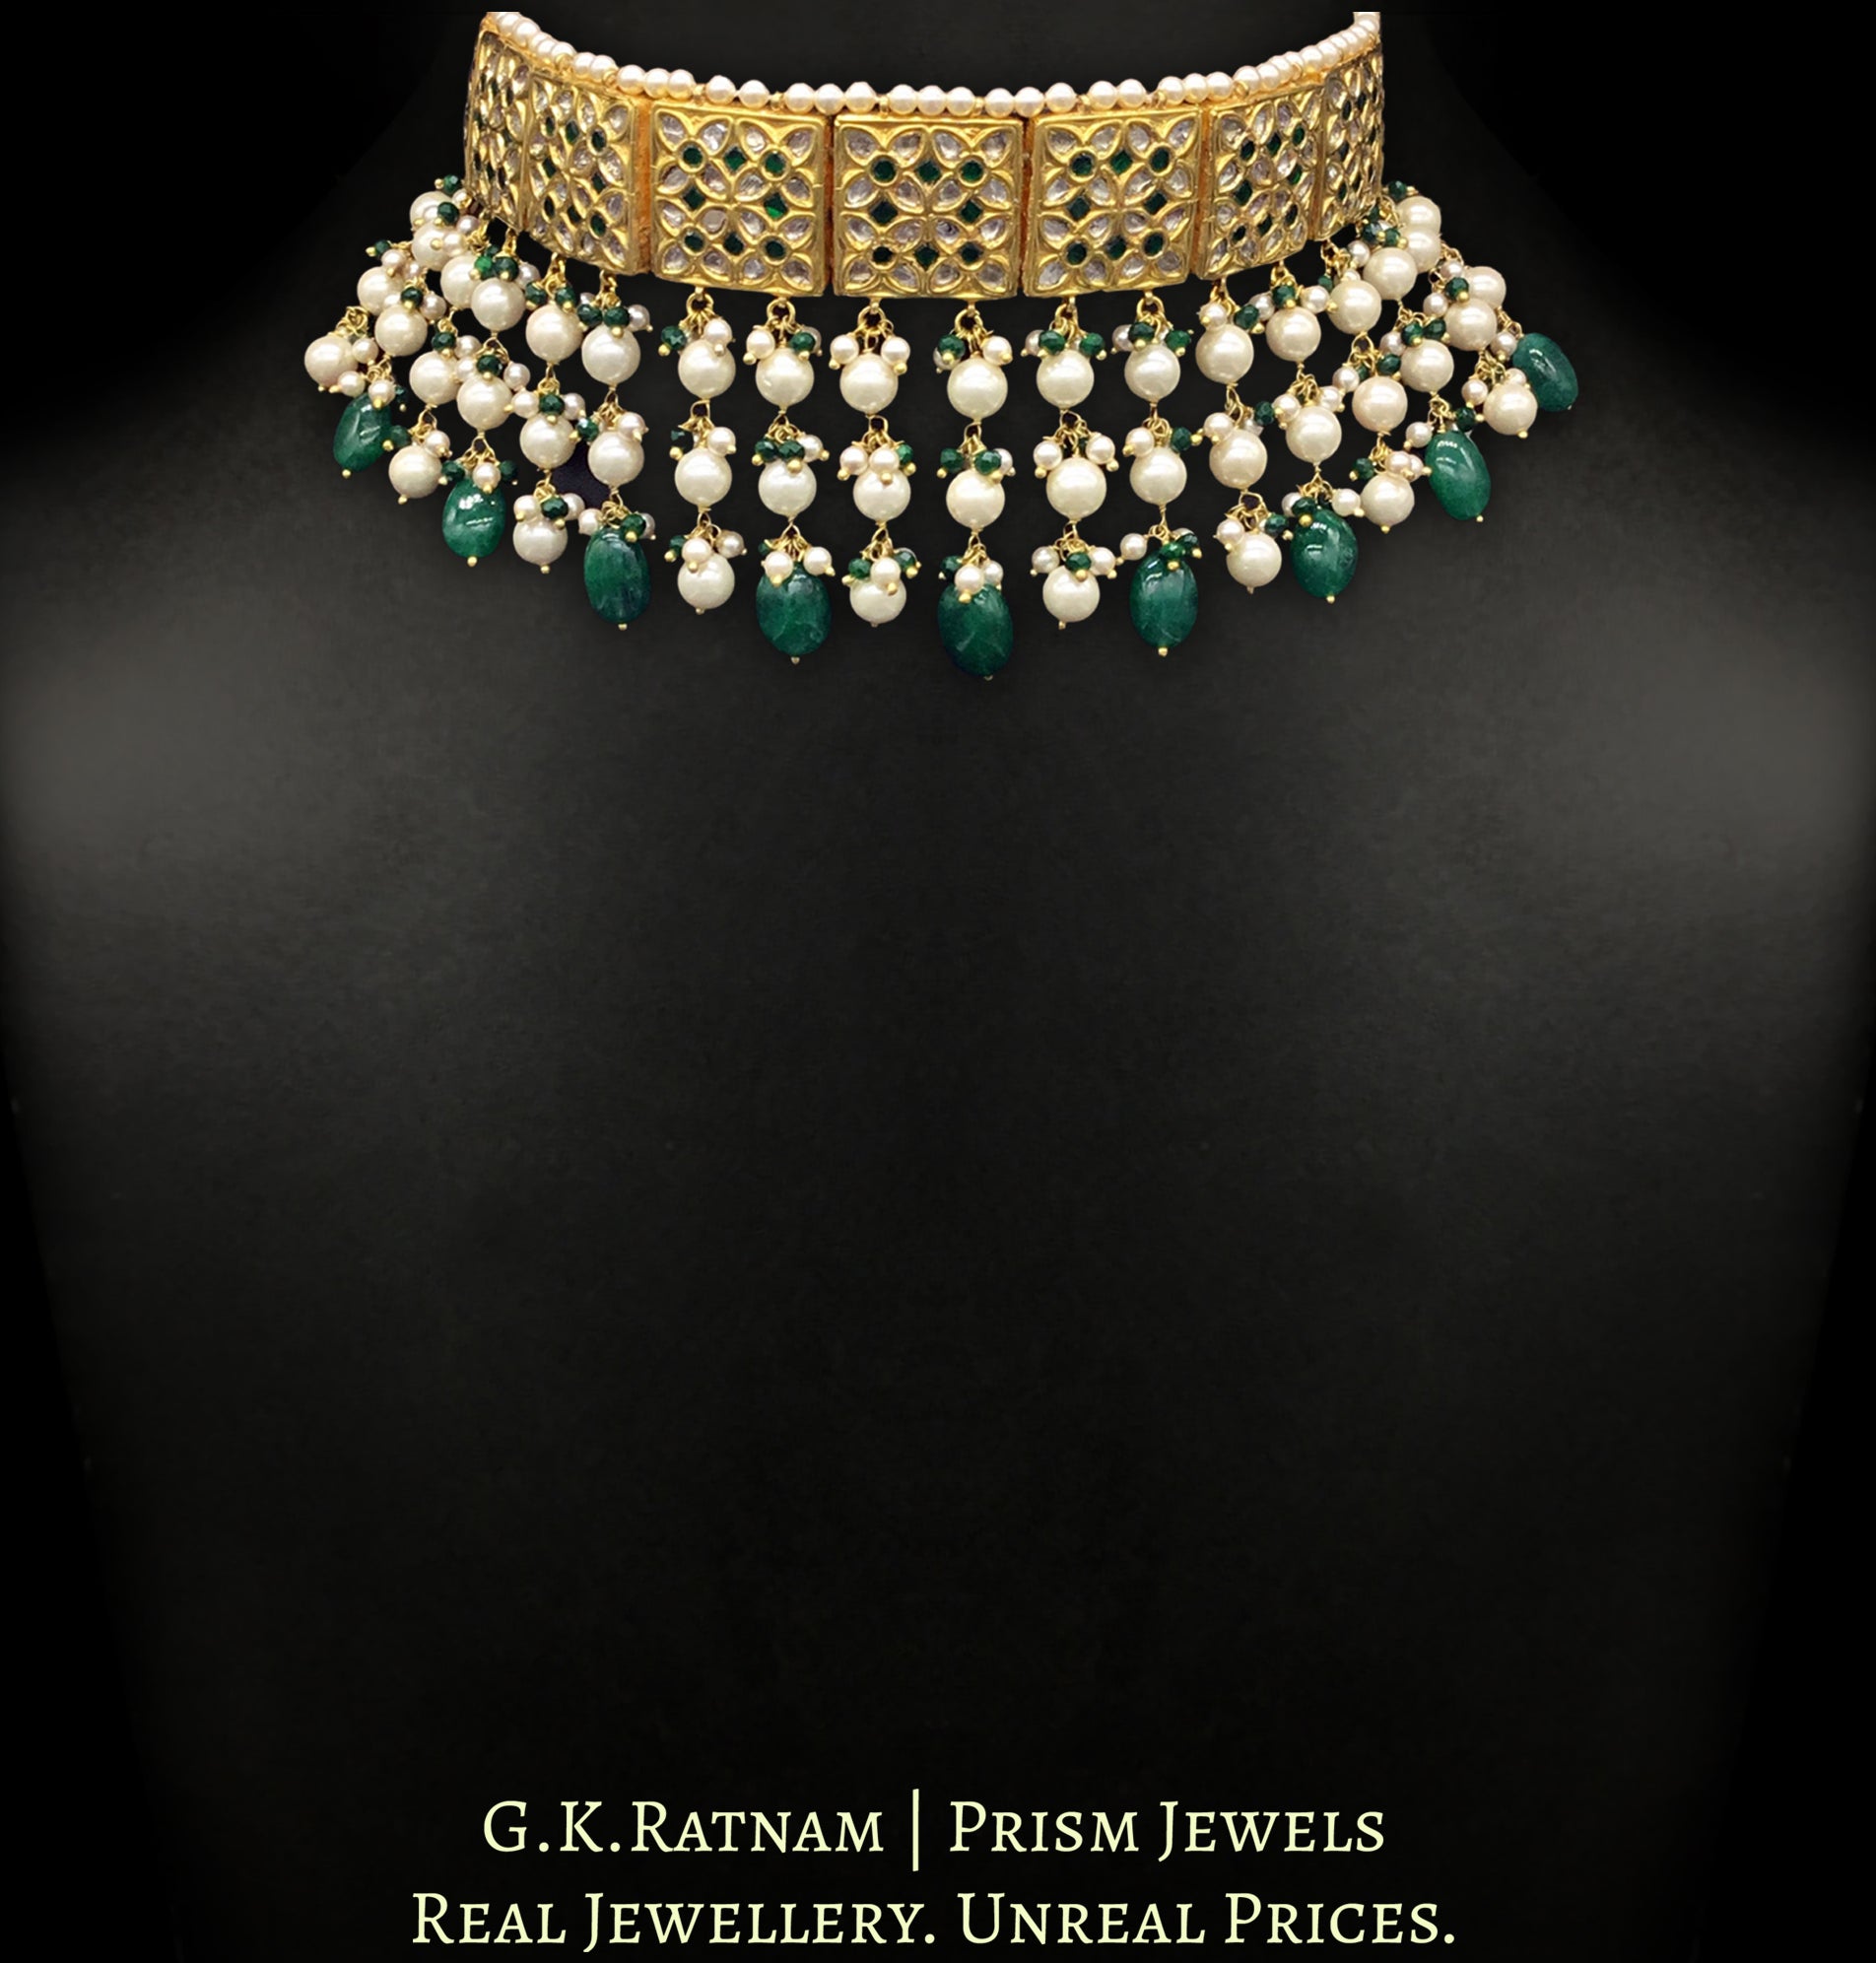 23k Gold and Diamond Polki Choker Necklace Set with emerald-green stones set with uncut diamonds